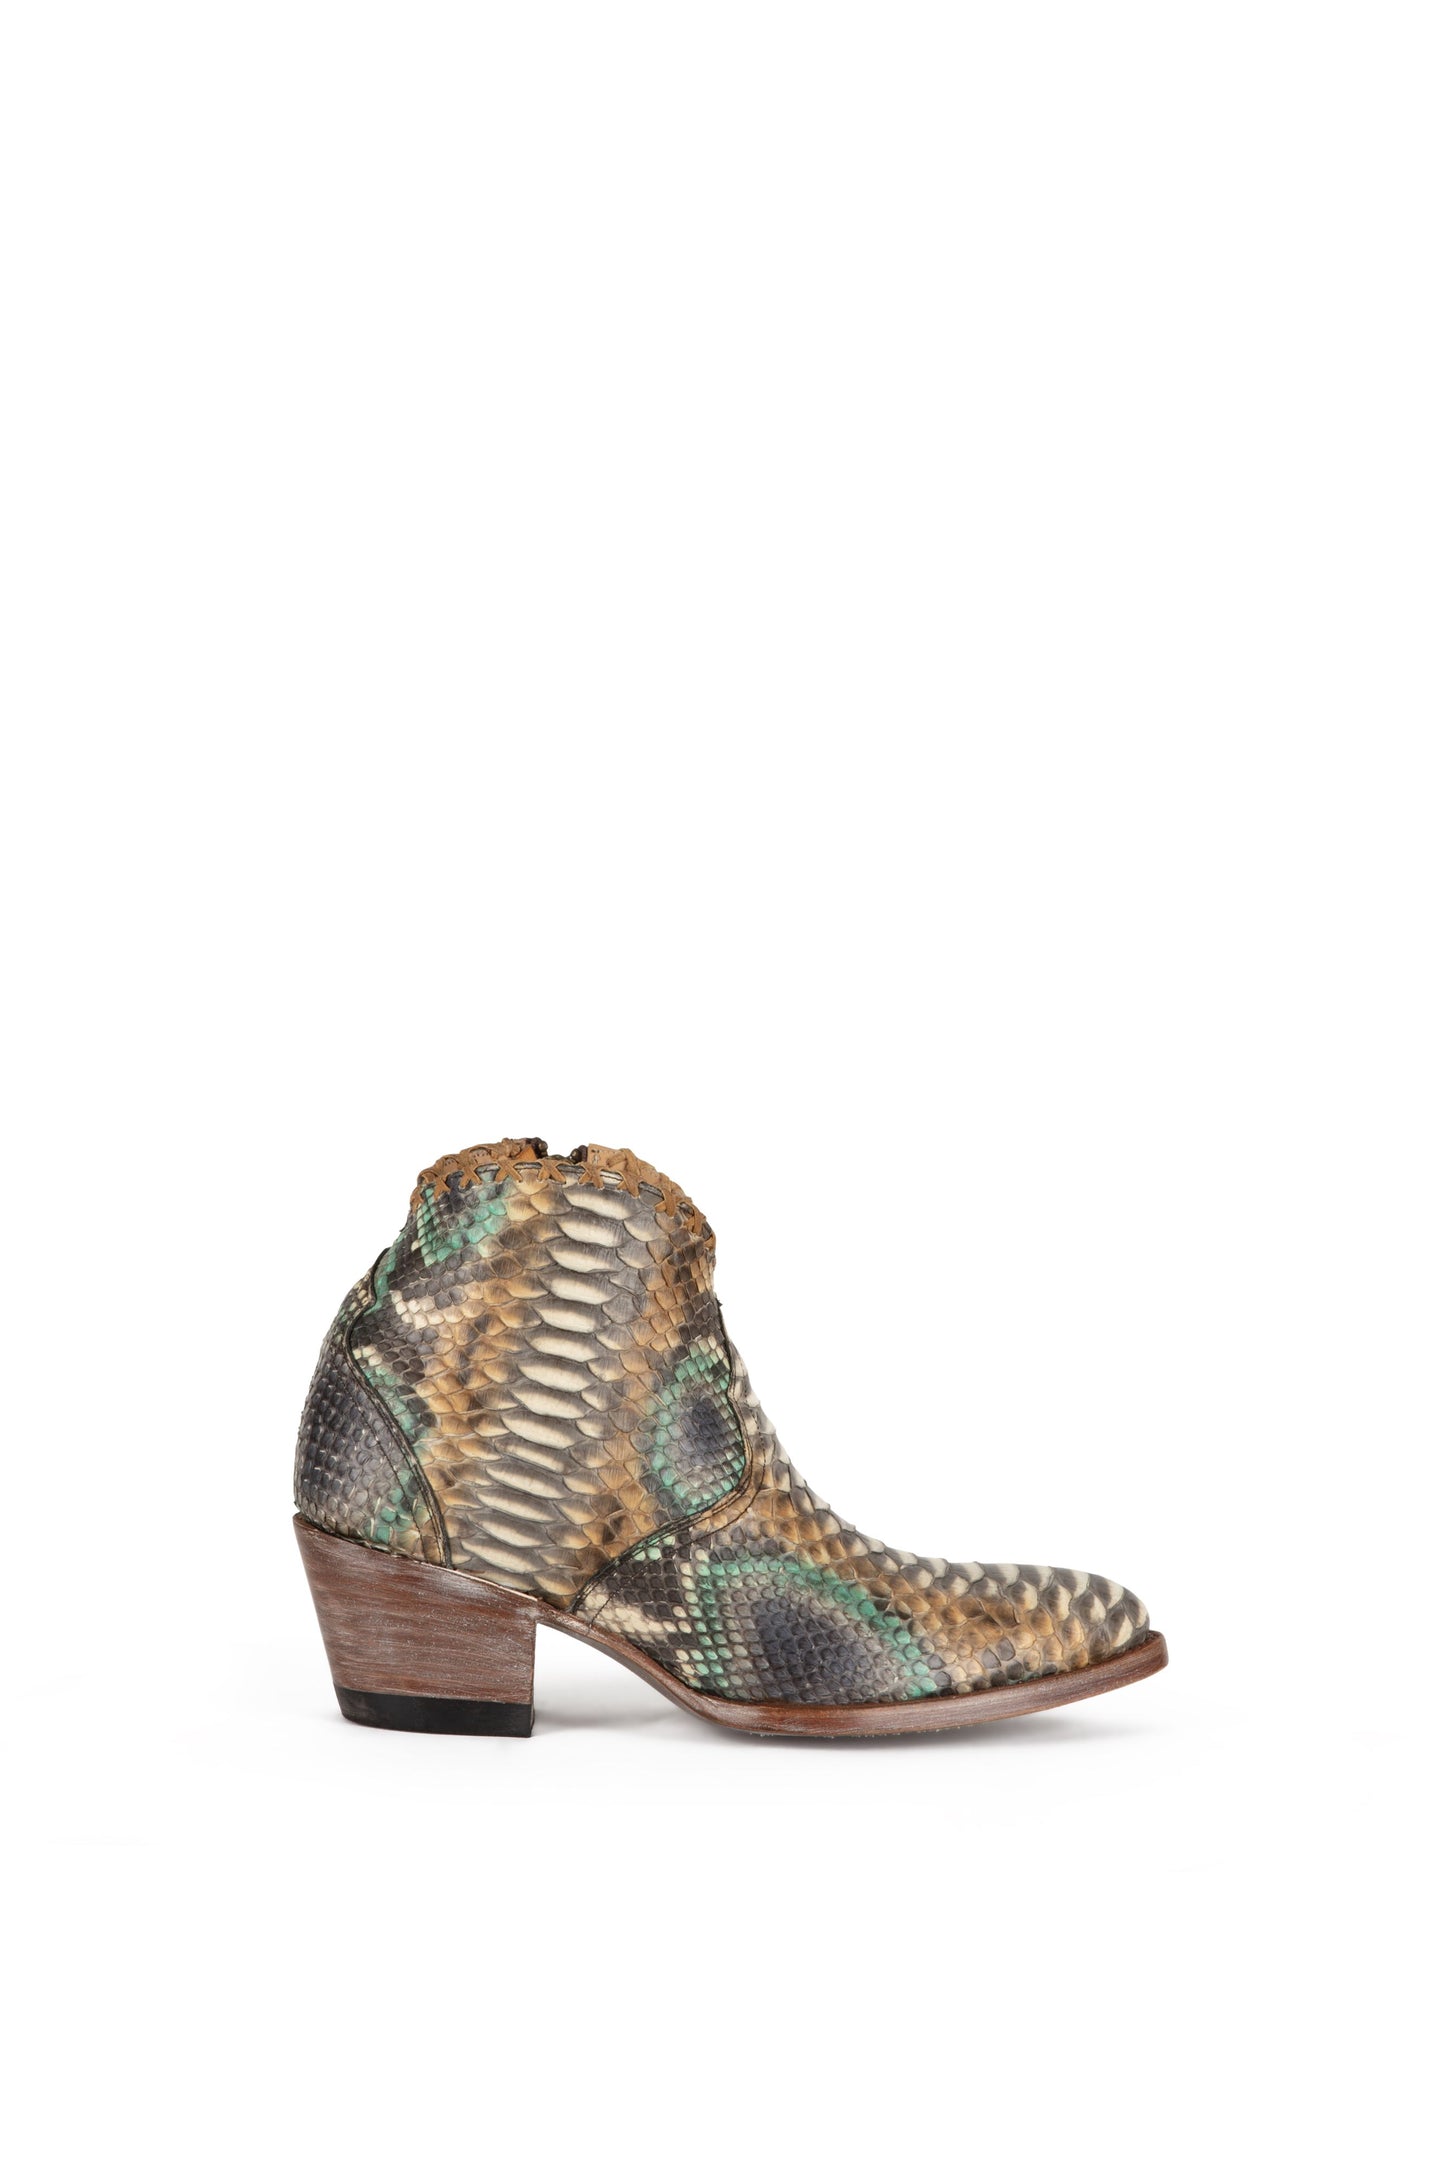 Allens Brand - Dixie Python - Almond Toe - Natural & Turquoise